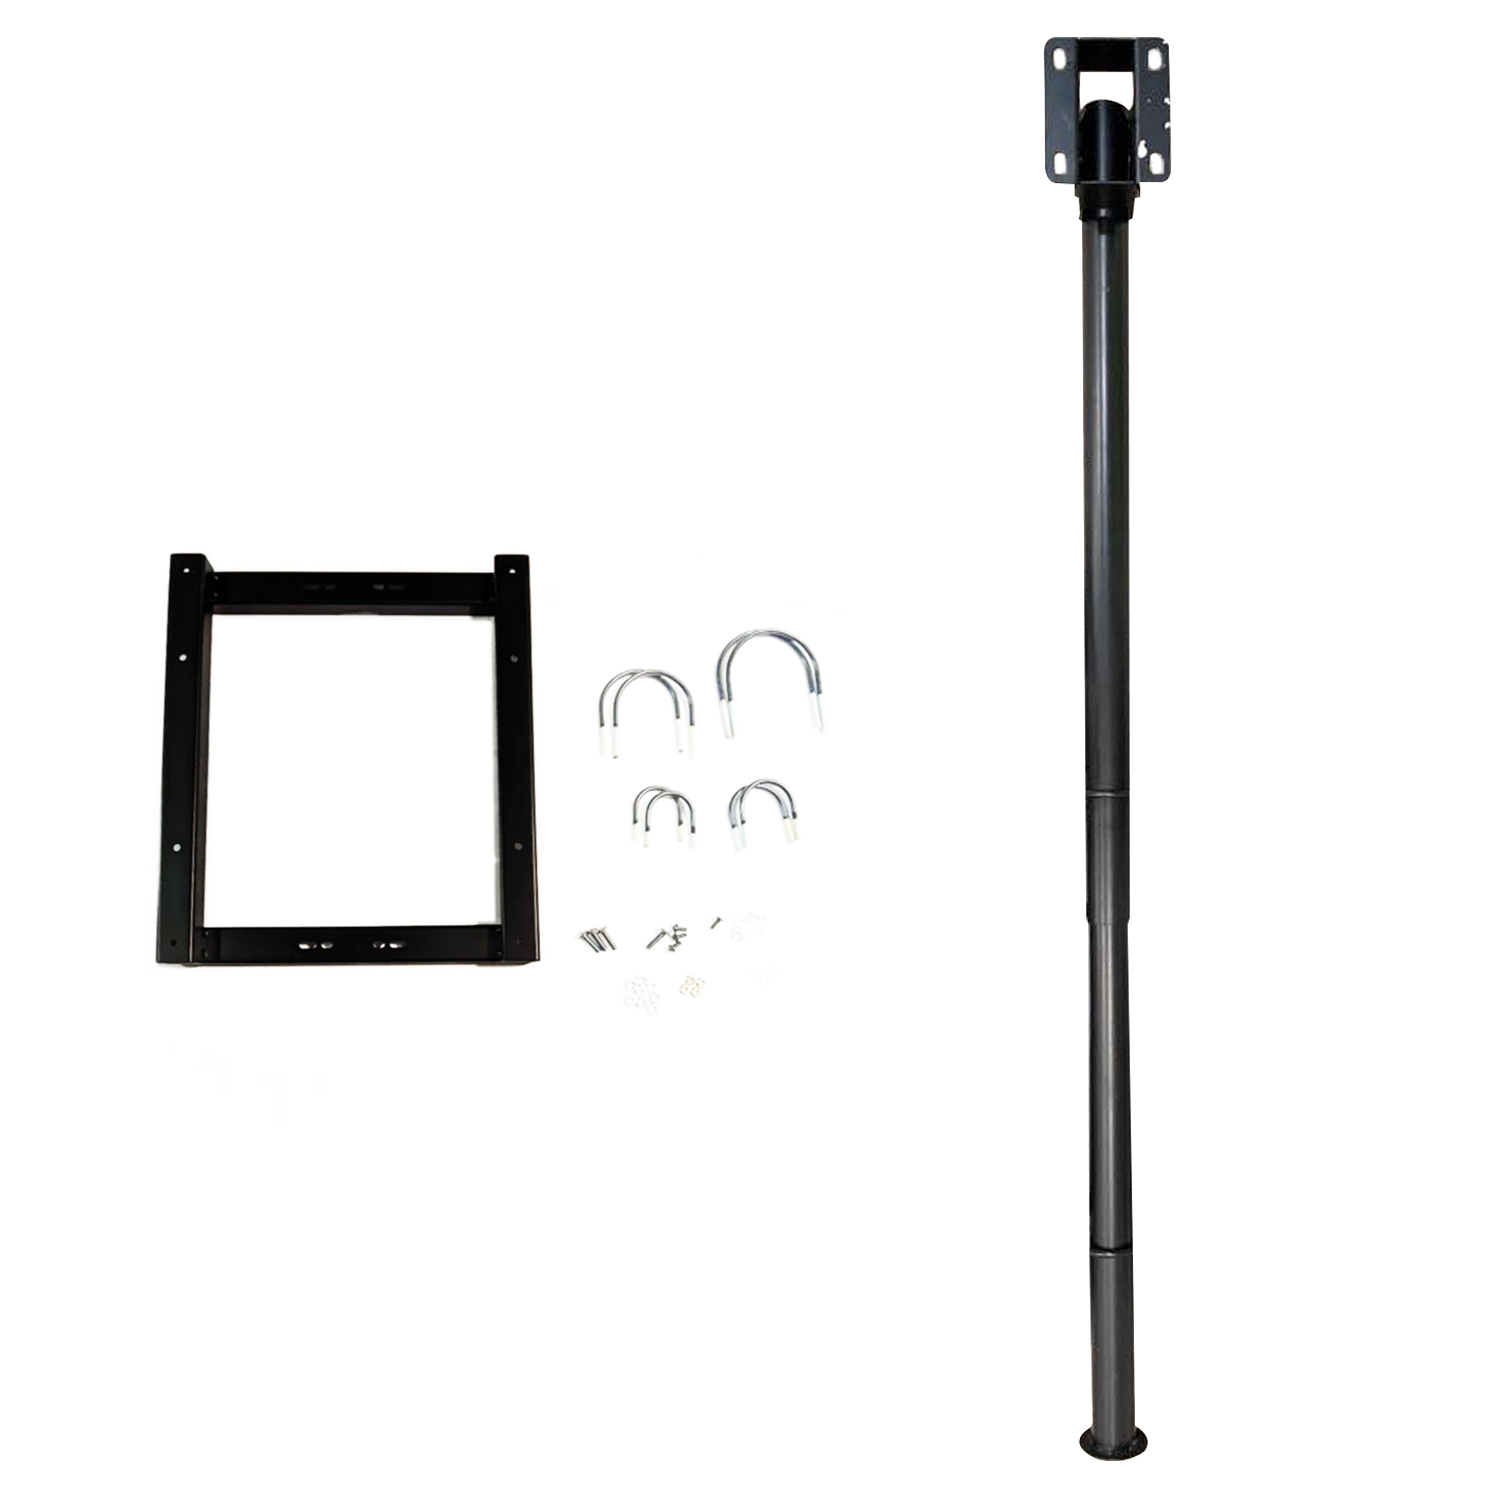 Pole and bracket ceiling mount kit for storm shell tv cover on white background. 